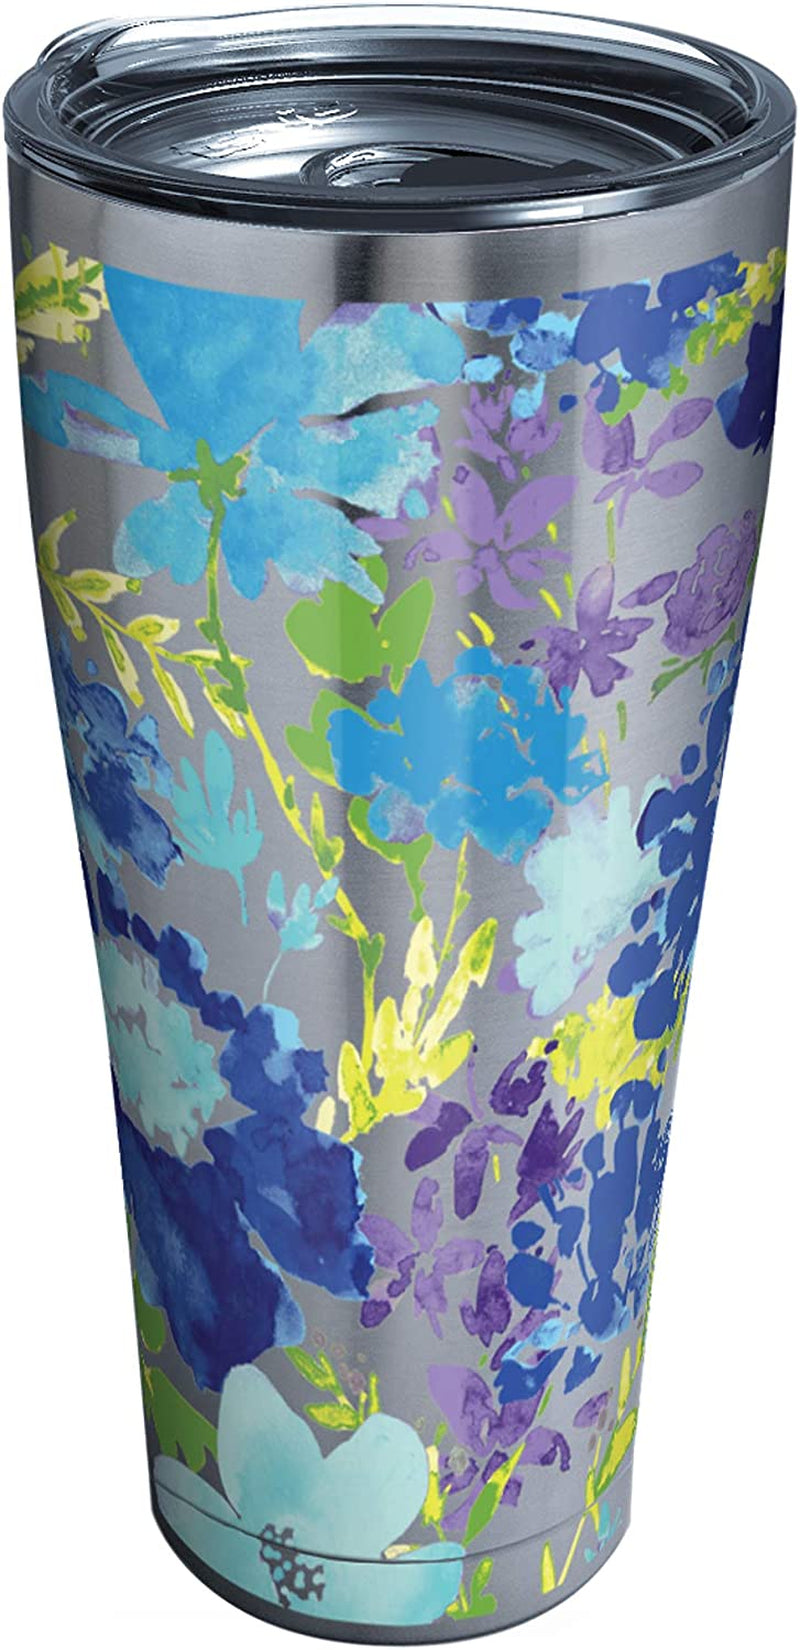 Tervis Made in USA Double Walled Fiesta Insulated Tumbler Cup Keeps Drinks Cold & Hot, 16Oz Mug - Purple Lid, Purple Floral Home & Garden > Kitchen & Dining > Tableware > Drinkware Tervis Stainless Steel 30oz 